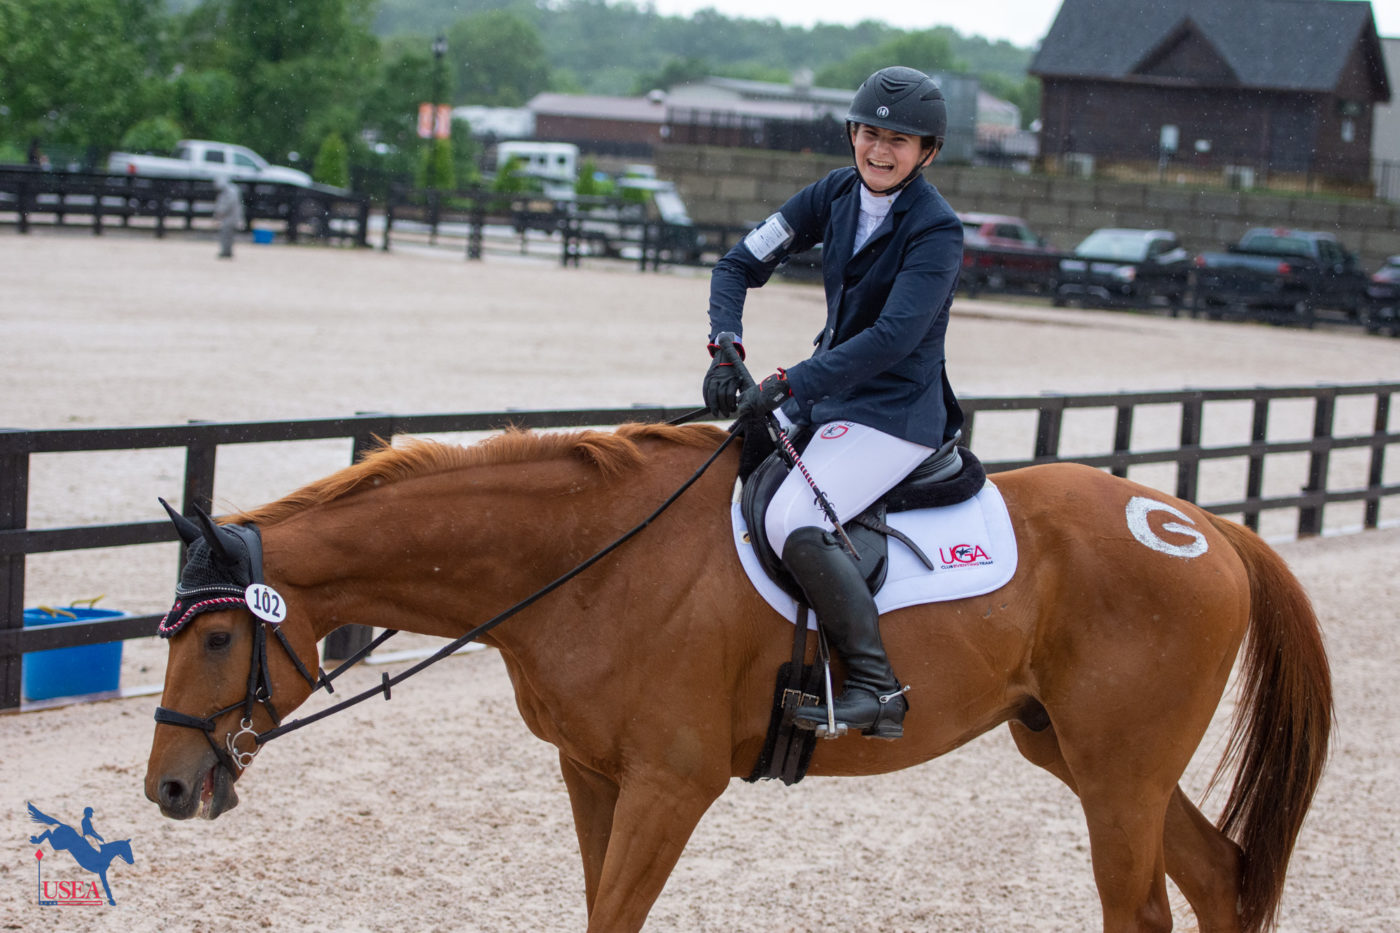 Julia Baumohl and Playground competed for UGA. Usea/Shelby Allen photo